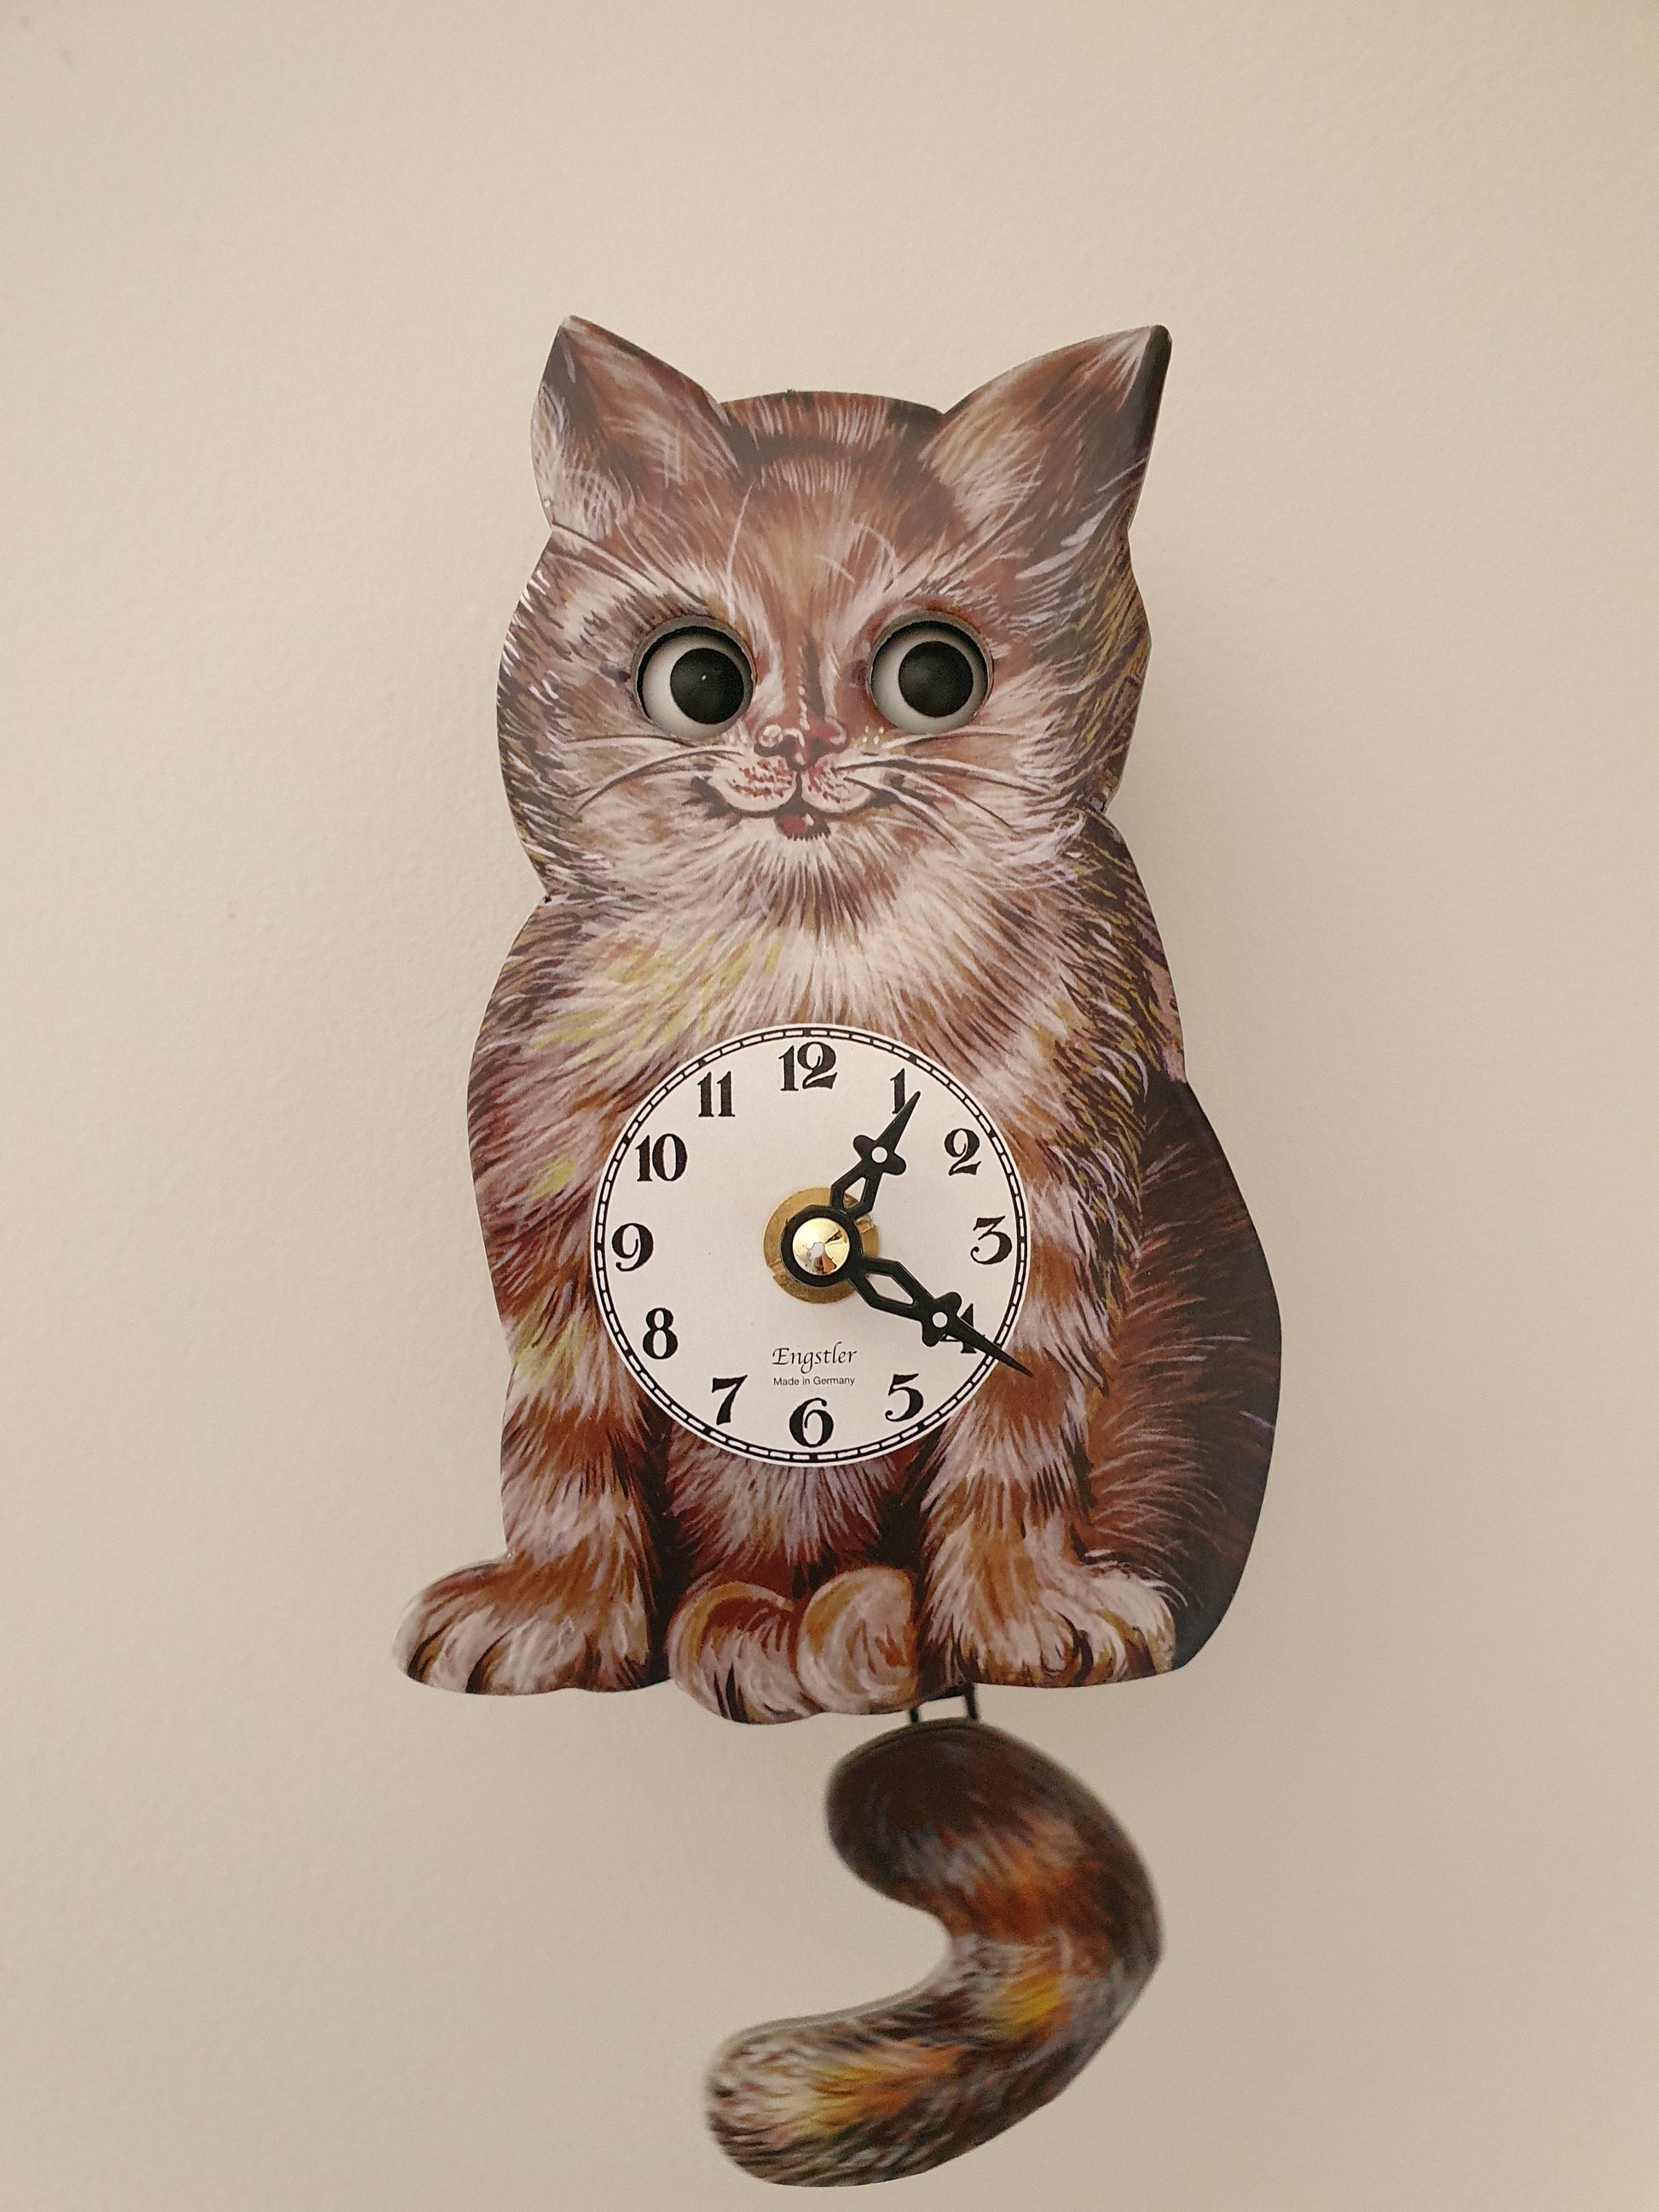 Beautiful Cat Clock With Its Eyes That Move. Made In Germany With Free Shipping Across Australia. Wall Clock [clocktyme.com] 